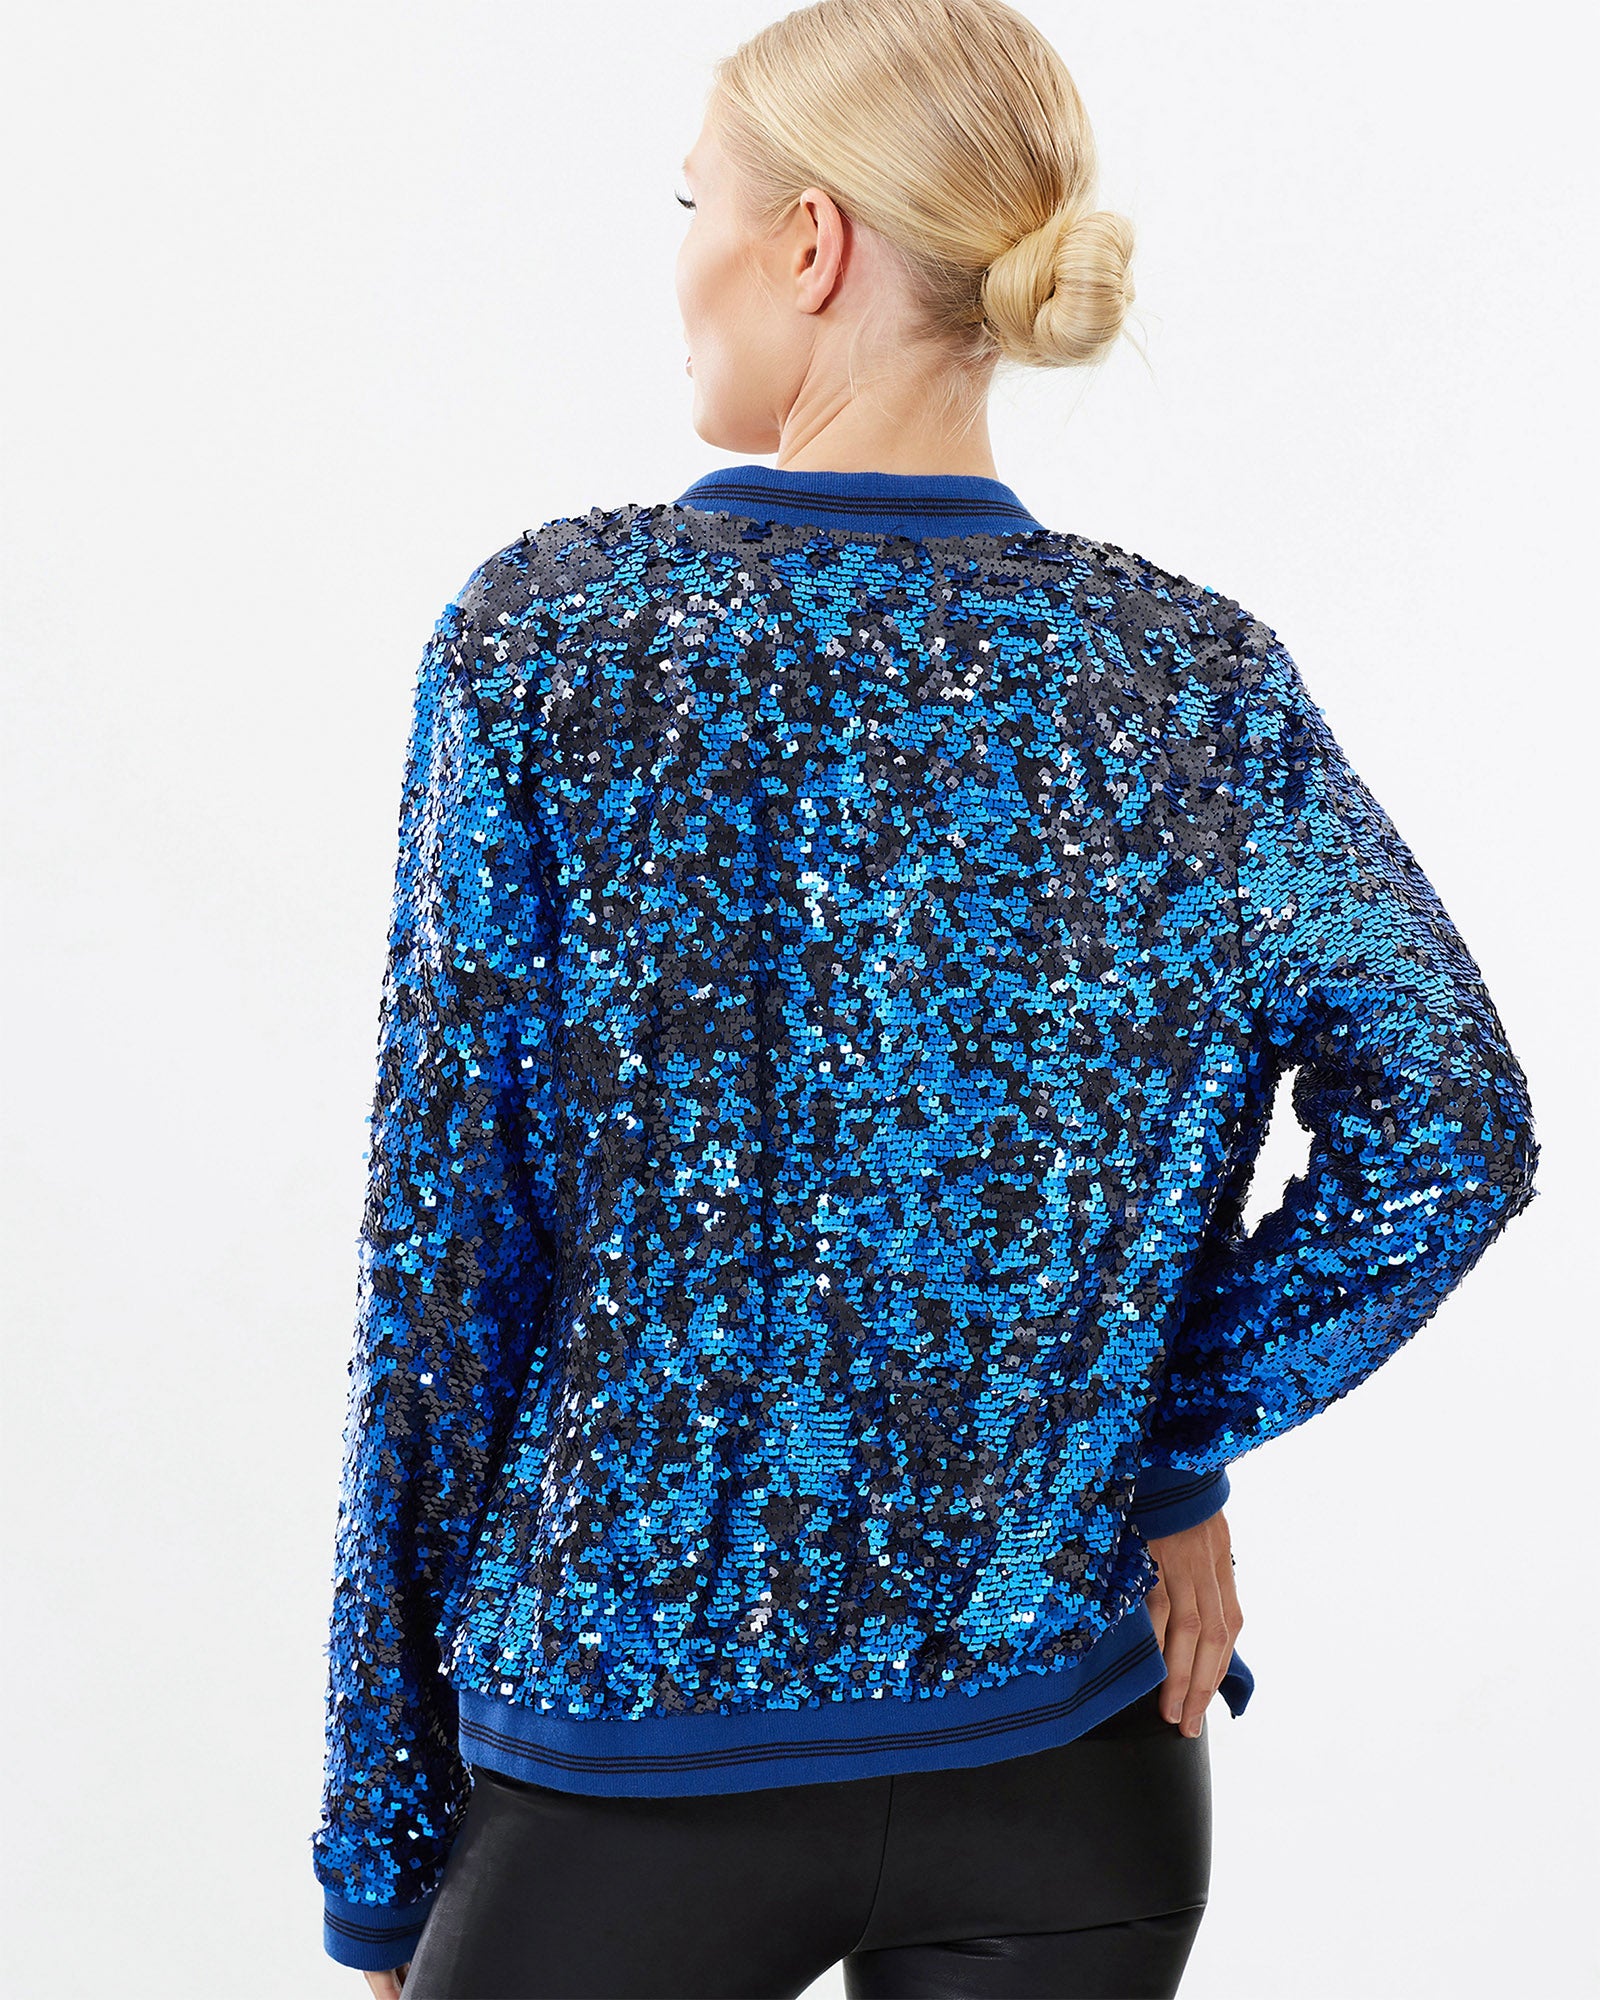 The Two Tone Sequin Bomber Jacket – Siyona